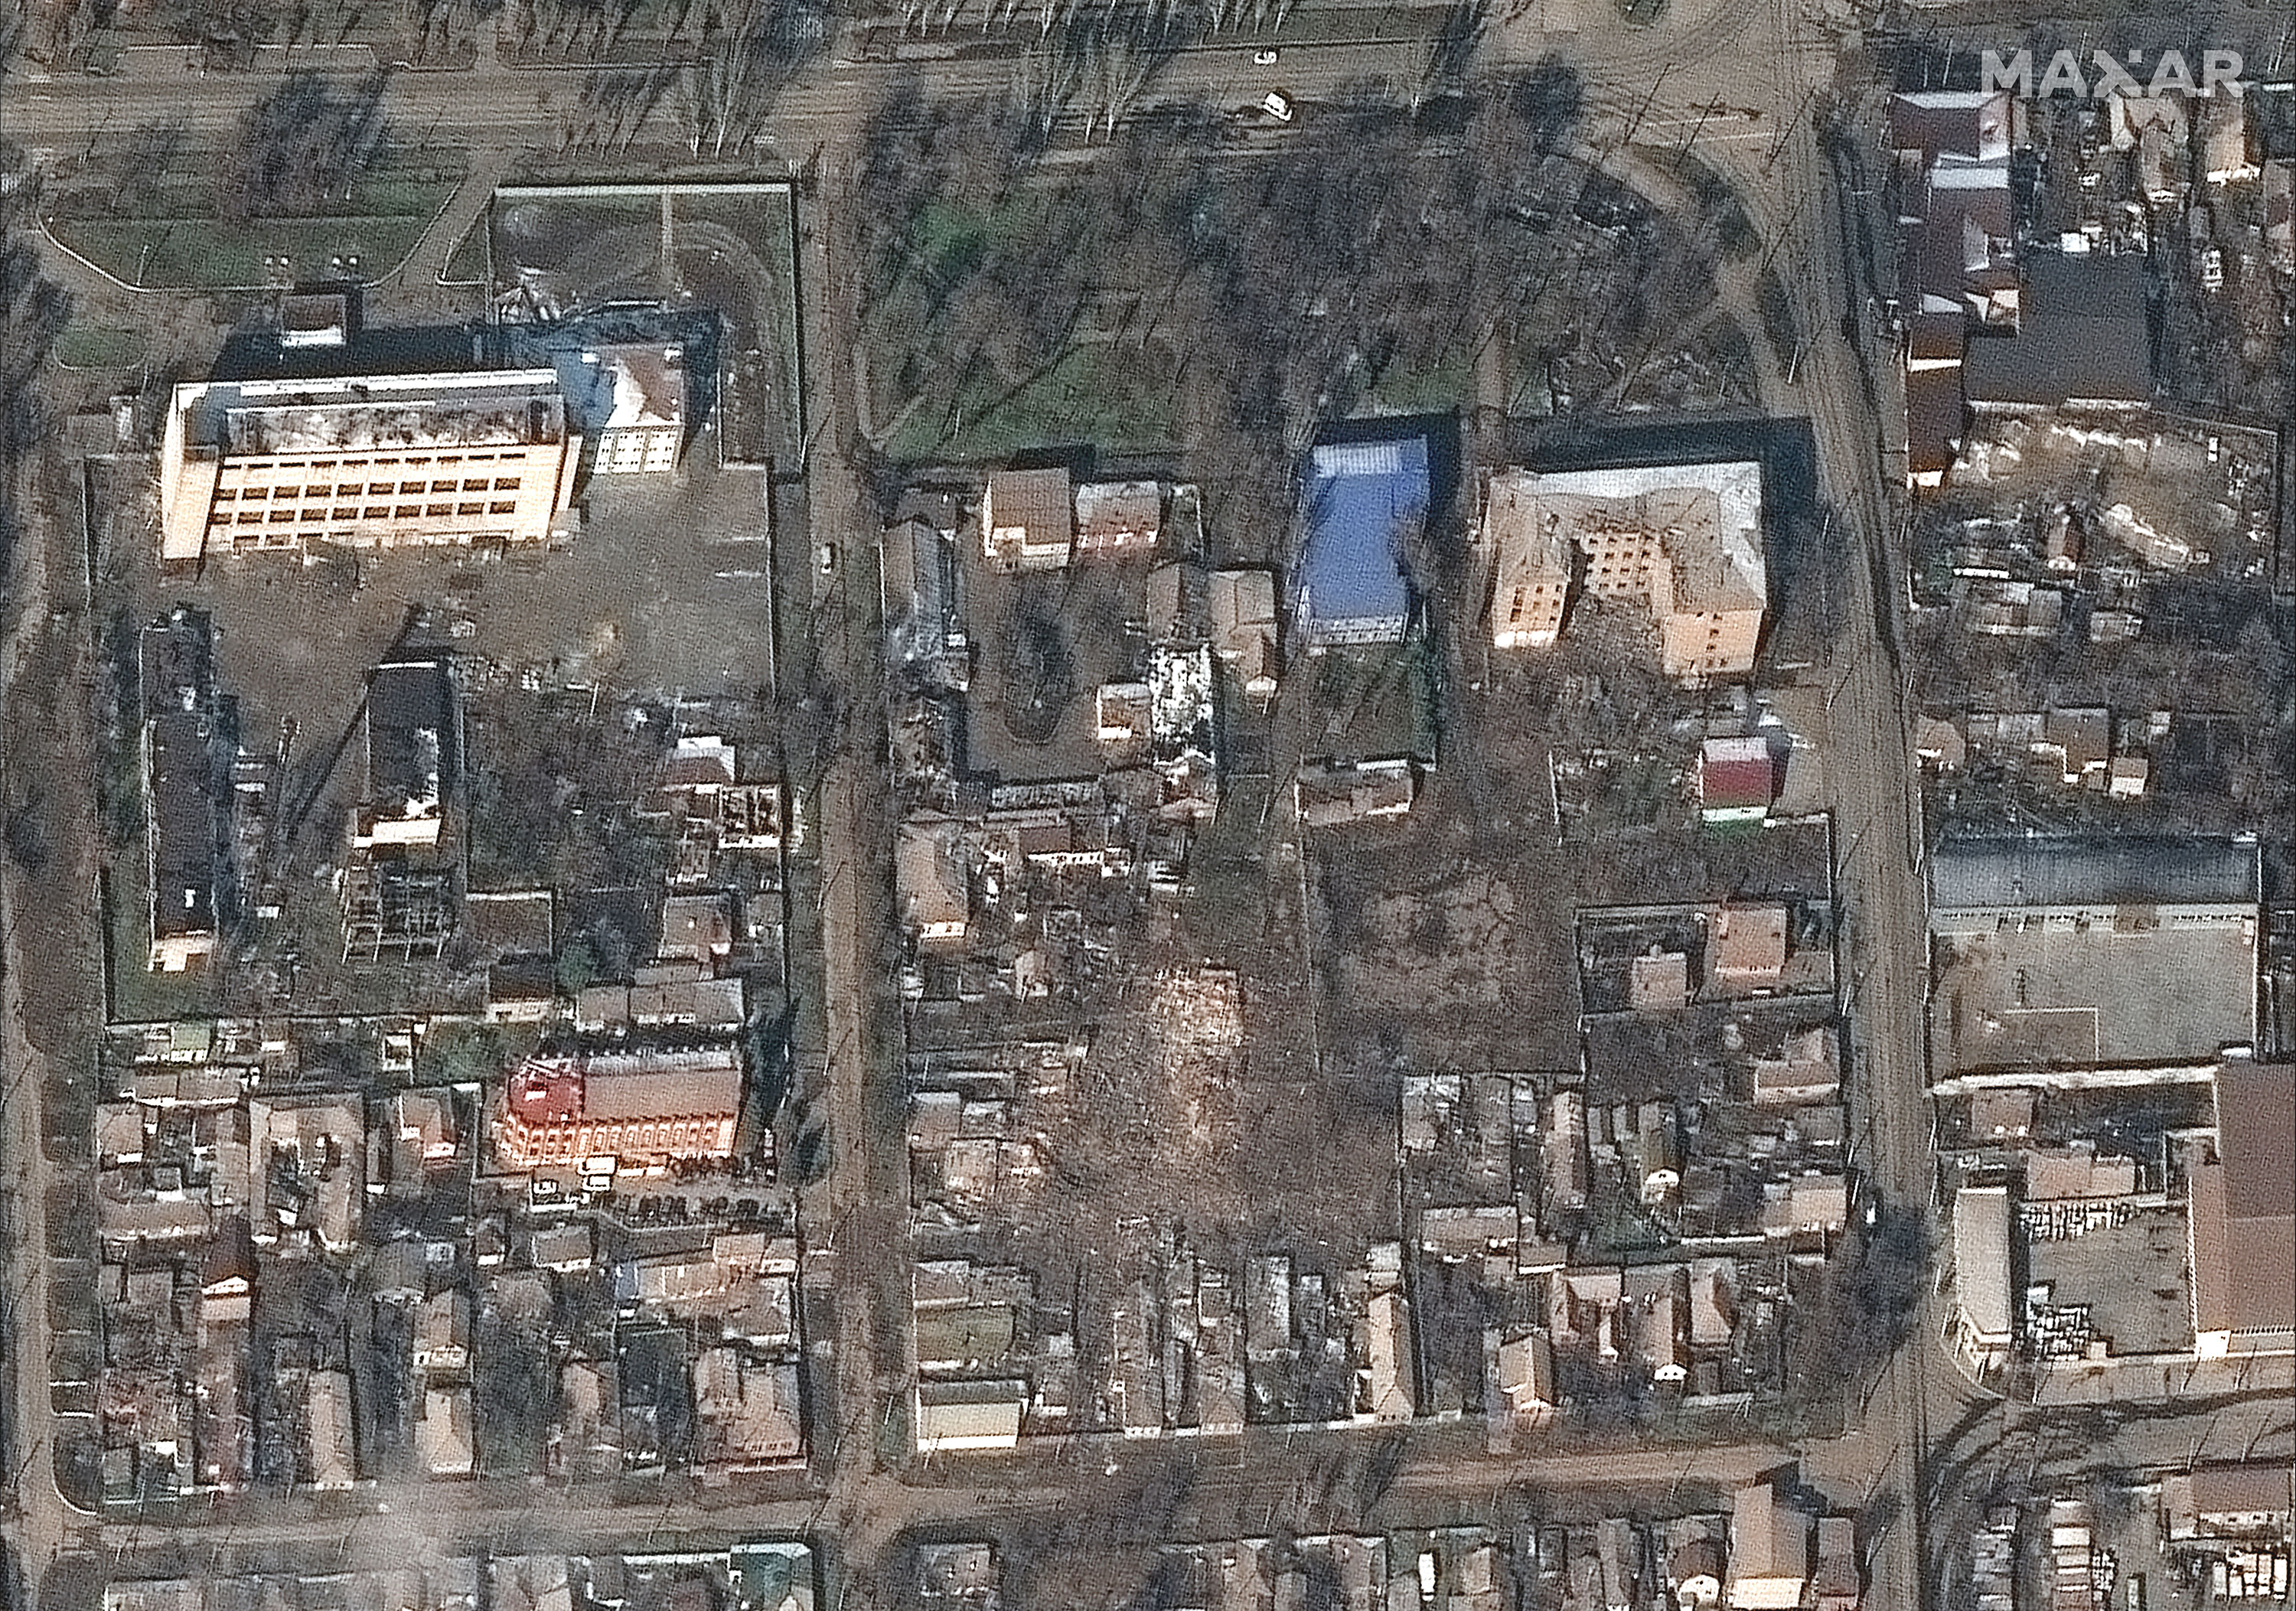 The same buildings and homes in central Mariupol are seen in this image taken March 9, 2022.